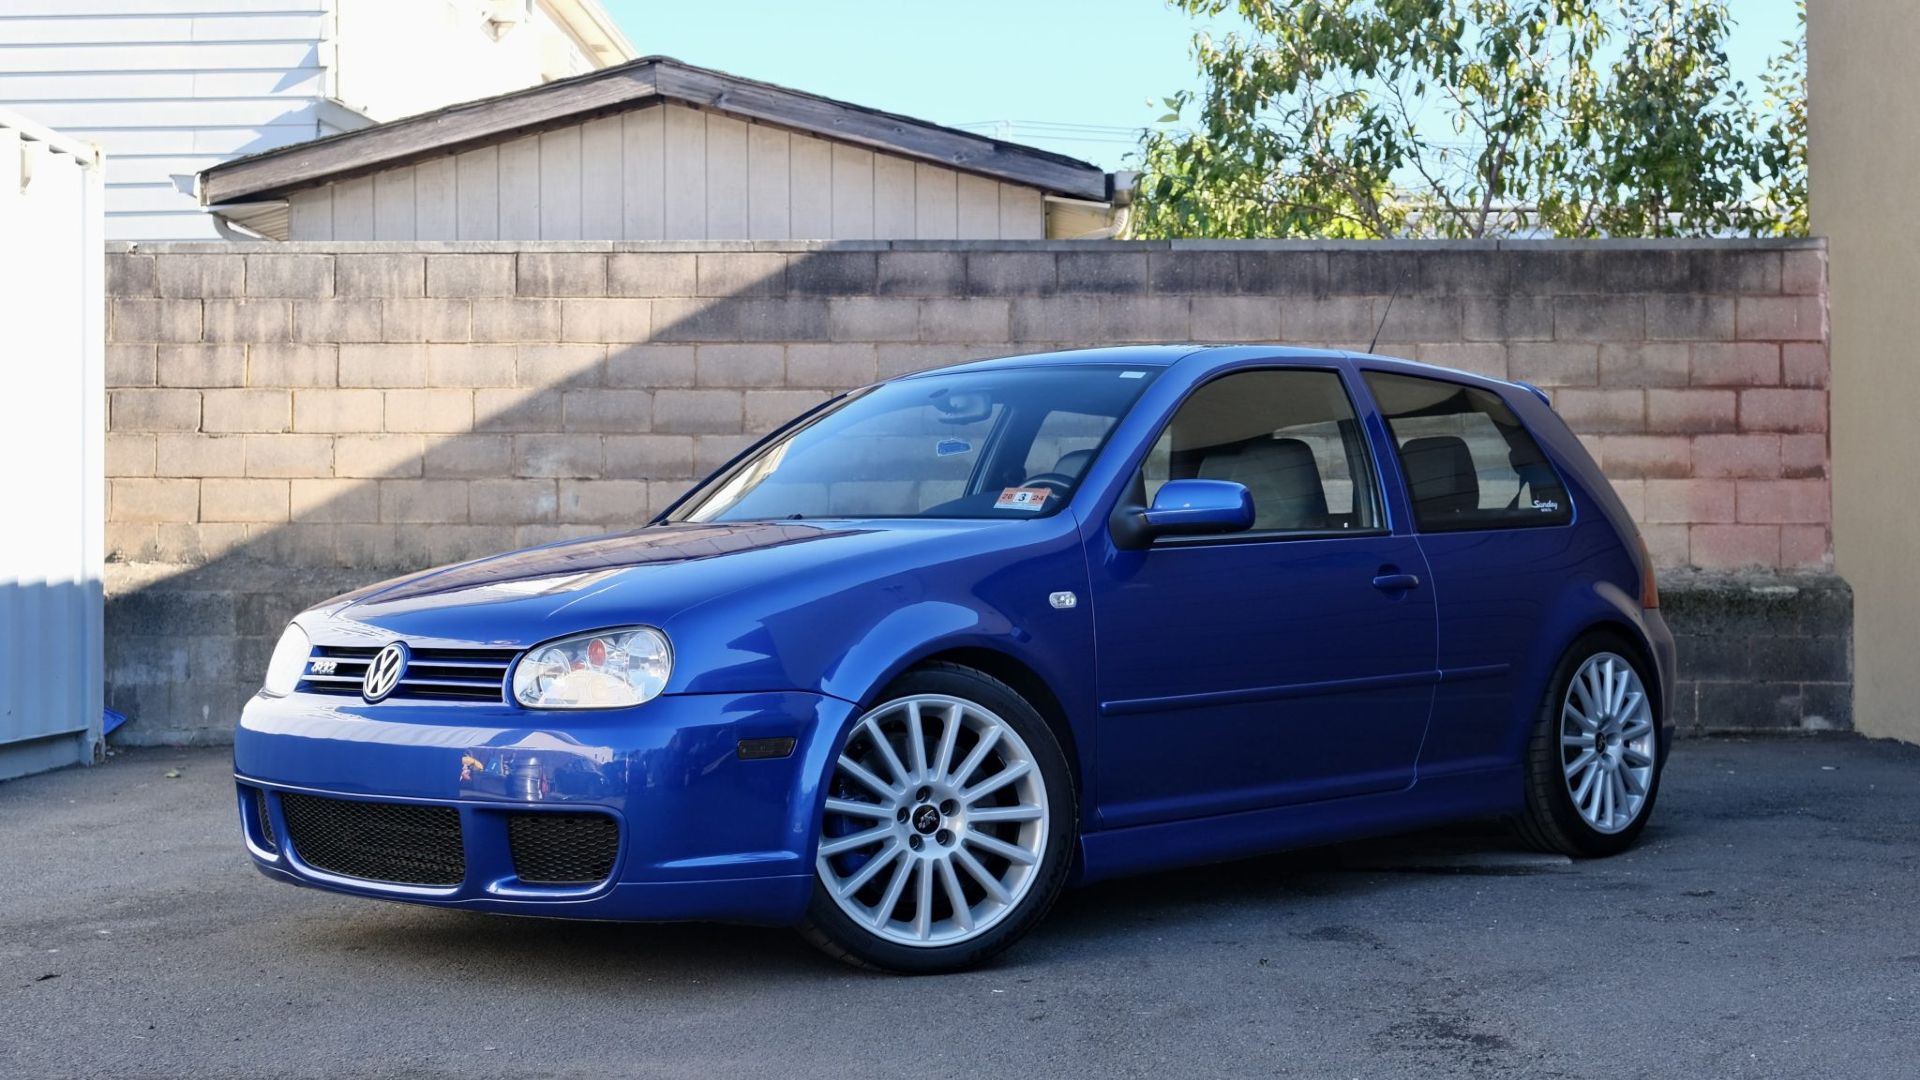 10 Reasons Why The 2004 Volkswagen Golf R32 Was The Coolest